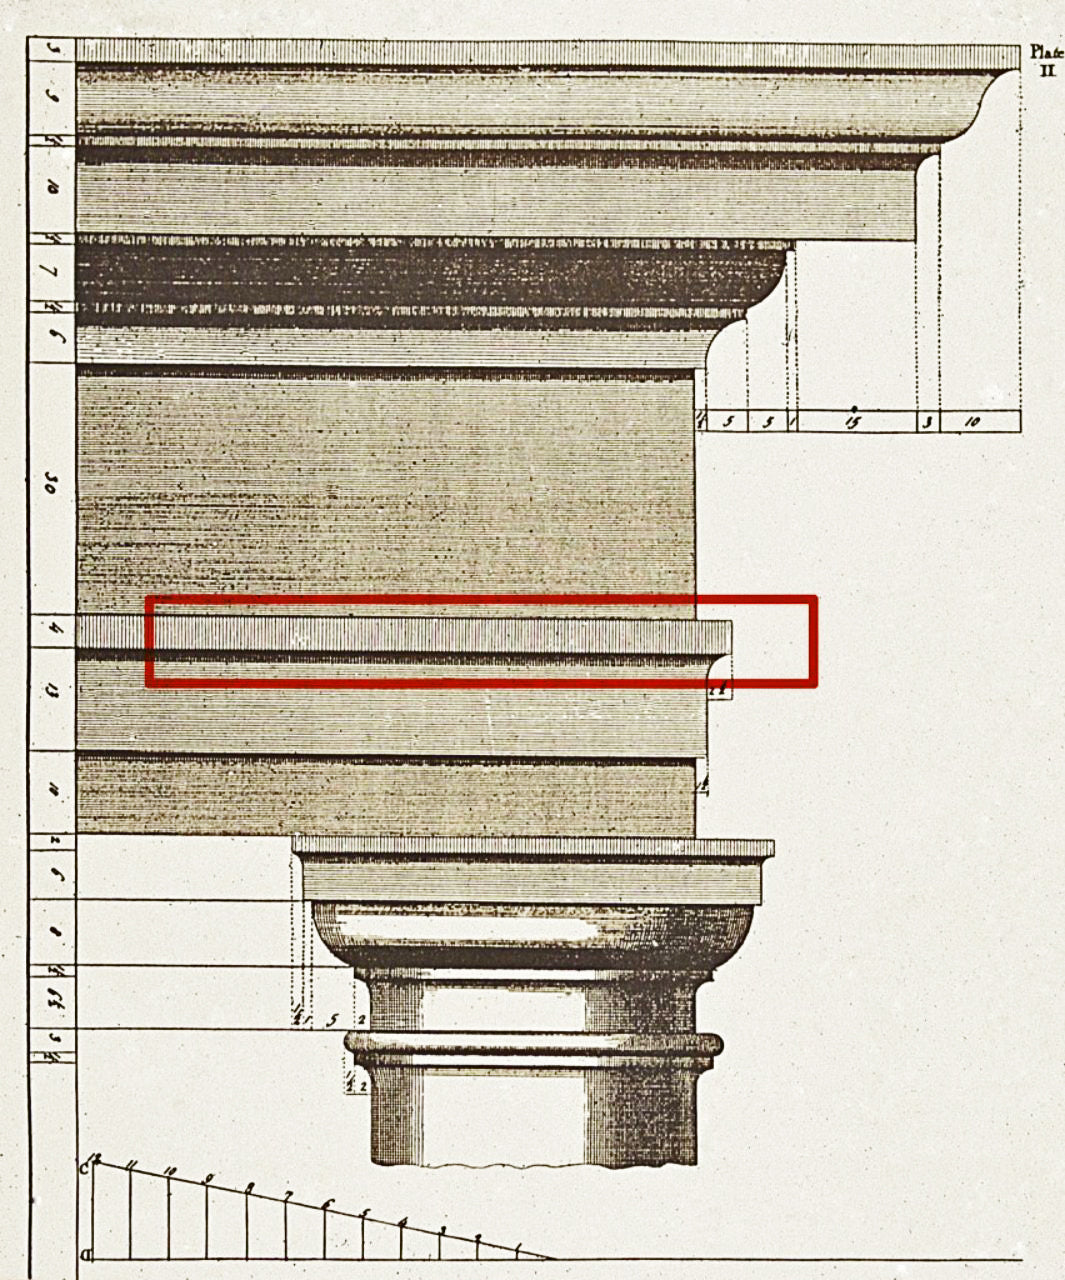 Taenia - Classical Architectural Term - Illustrated Glossary from Brockwell Incorporated